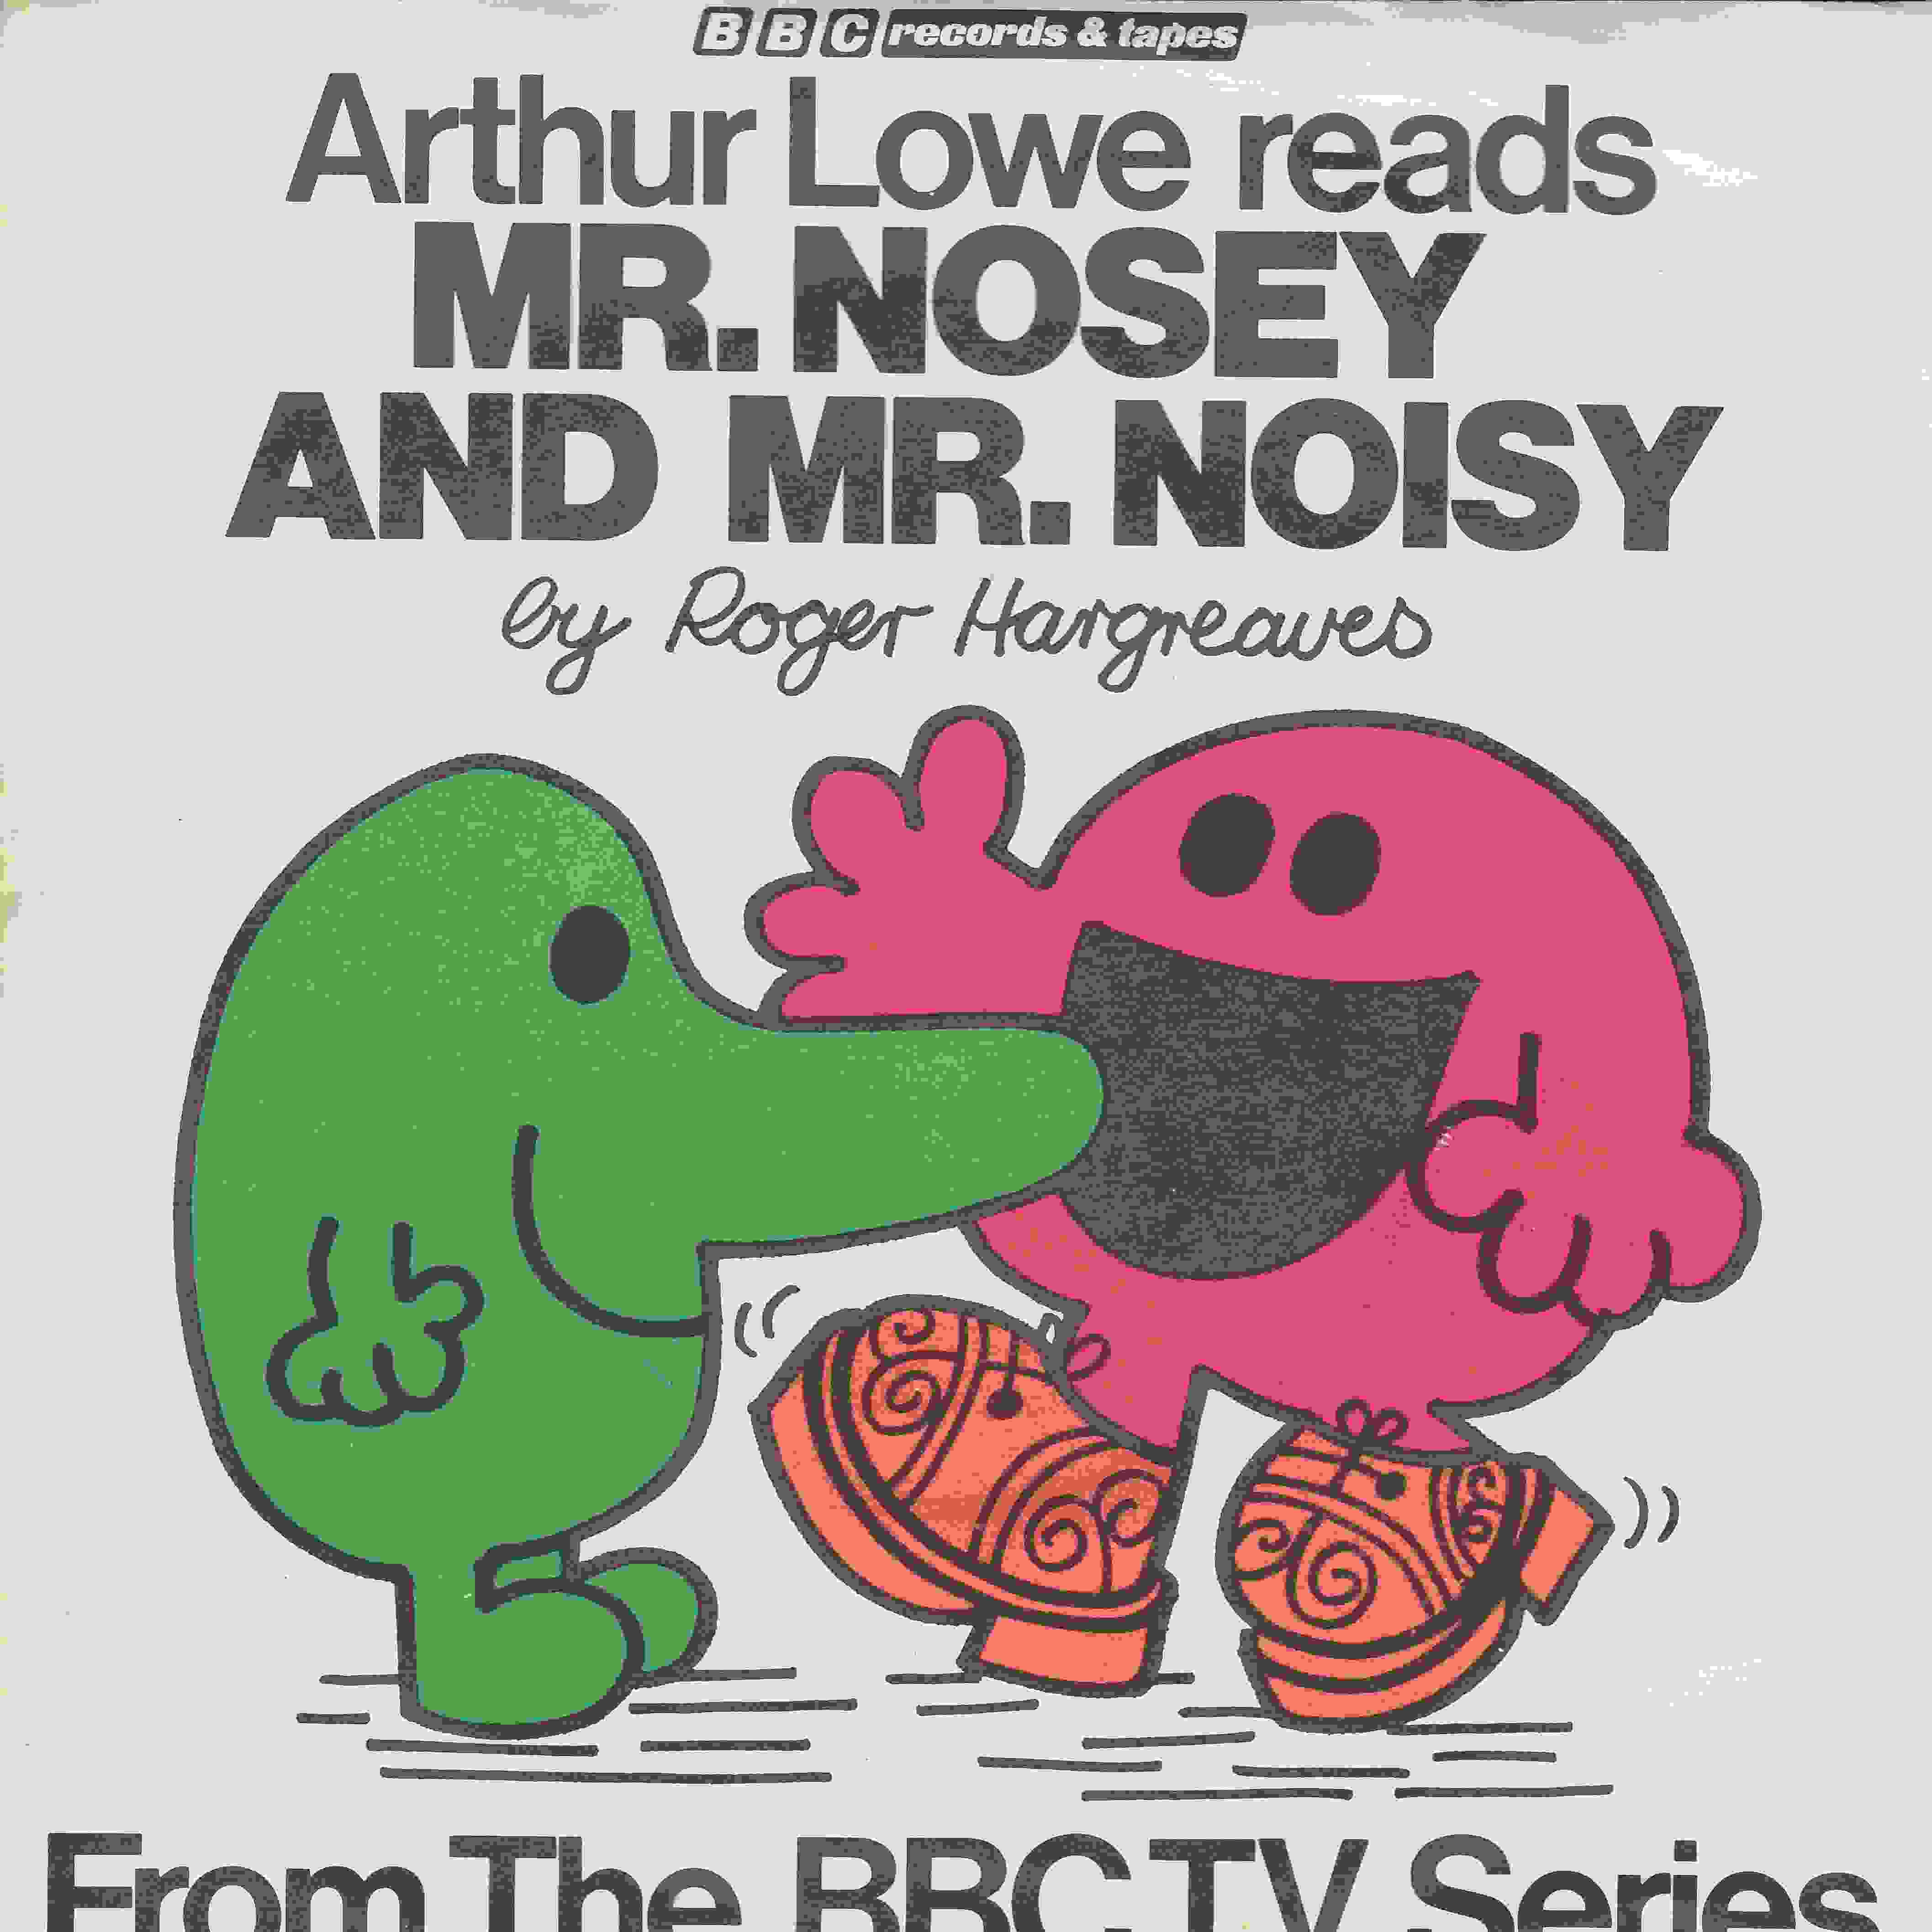 Picture of RESL 39 Mr Men - Mr Nosey by artist Roger Hargreaves from the BBC singles - Records and Tapes library